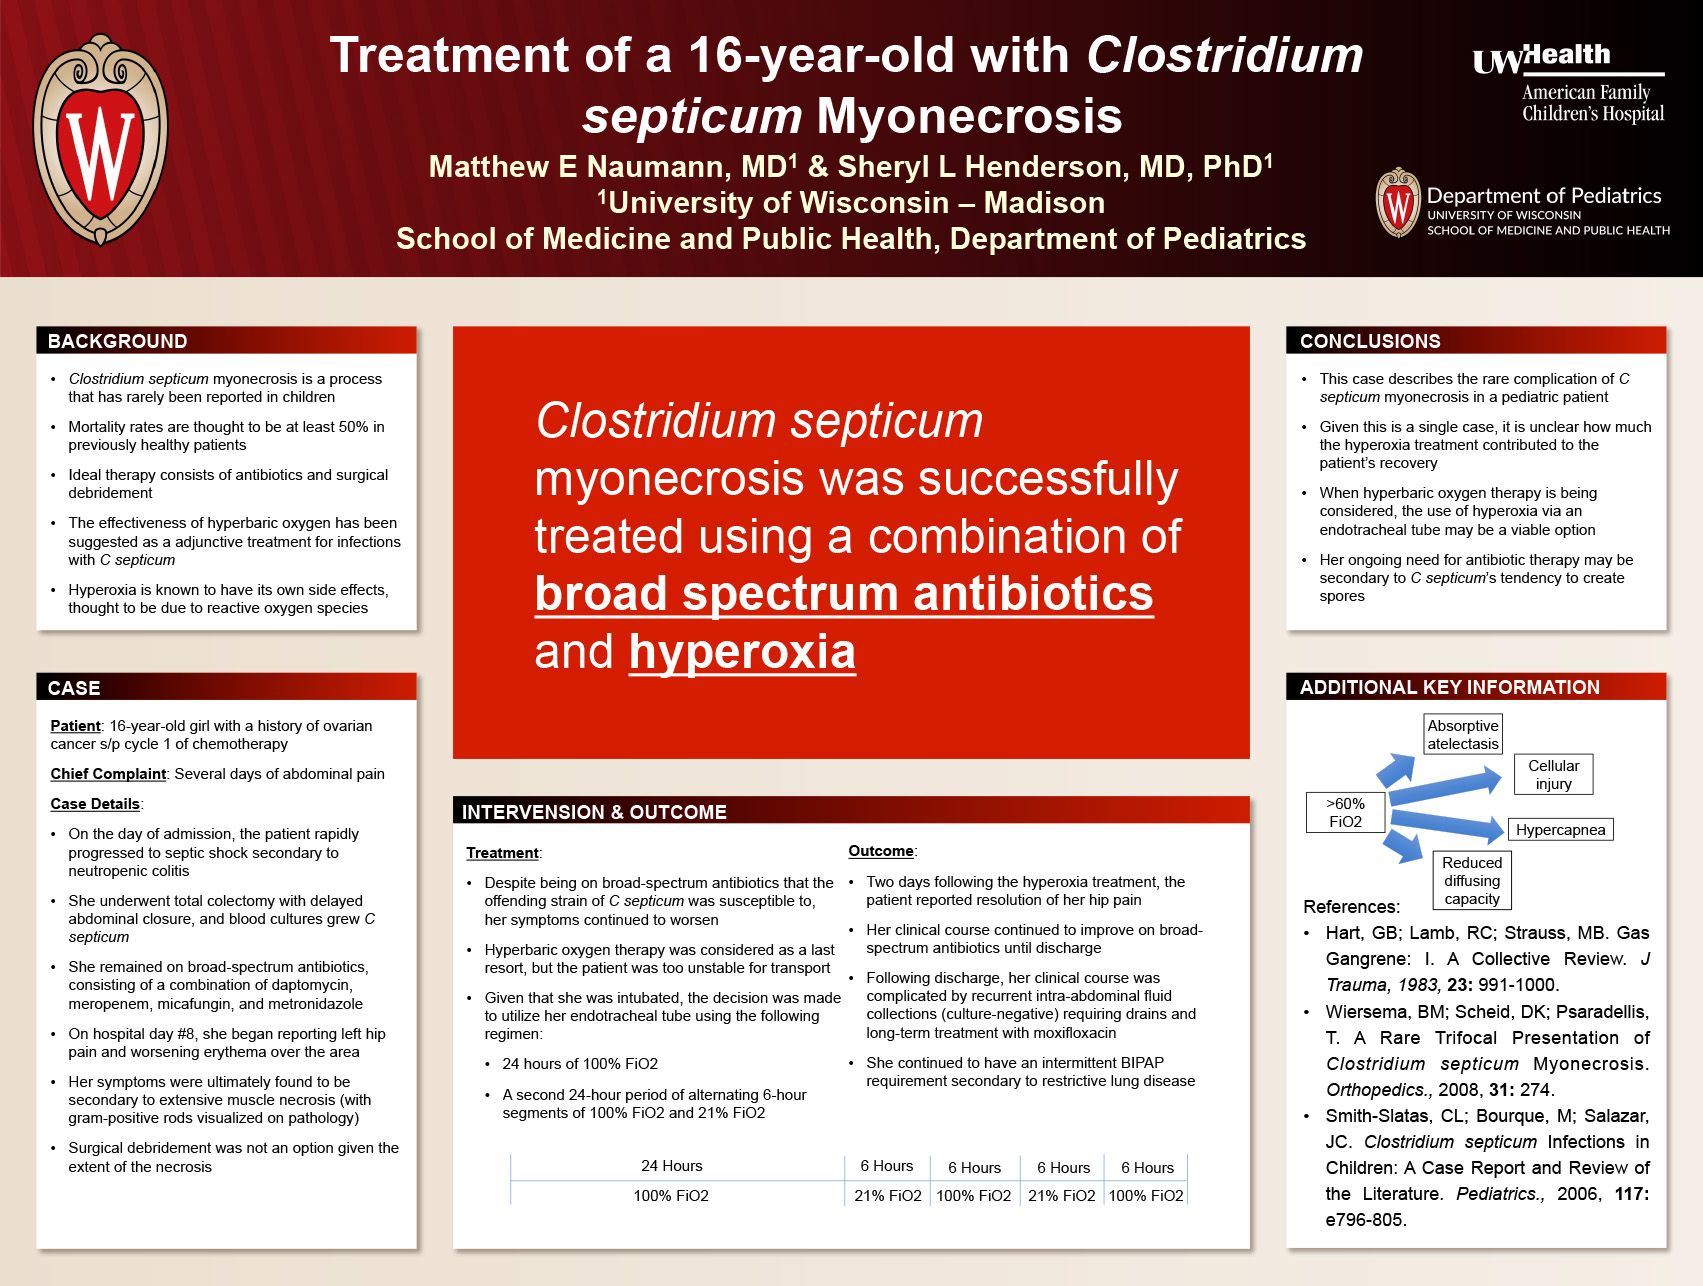 Treatment of a 16-year-old with Clostridium septicum Myonecrosis poster image